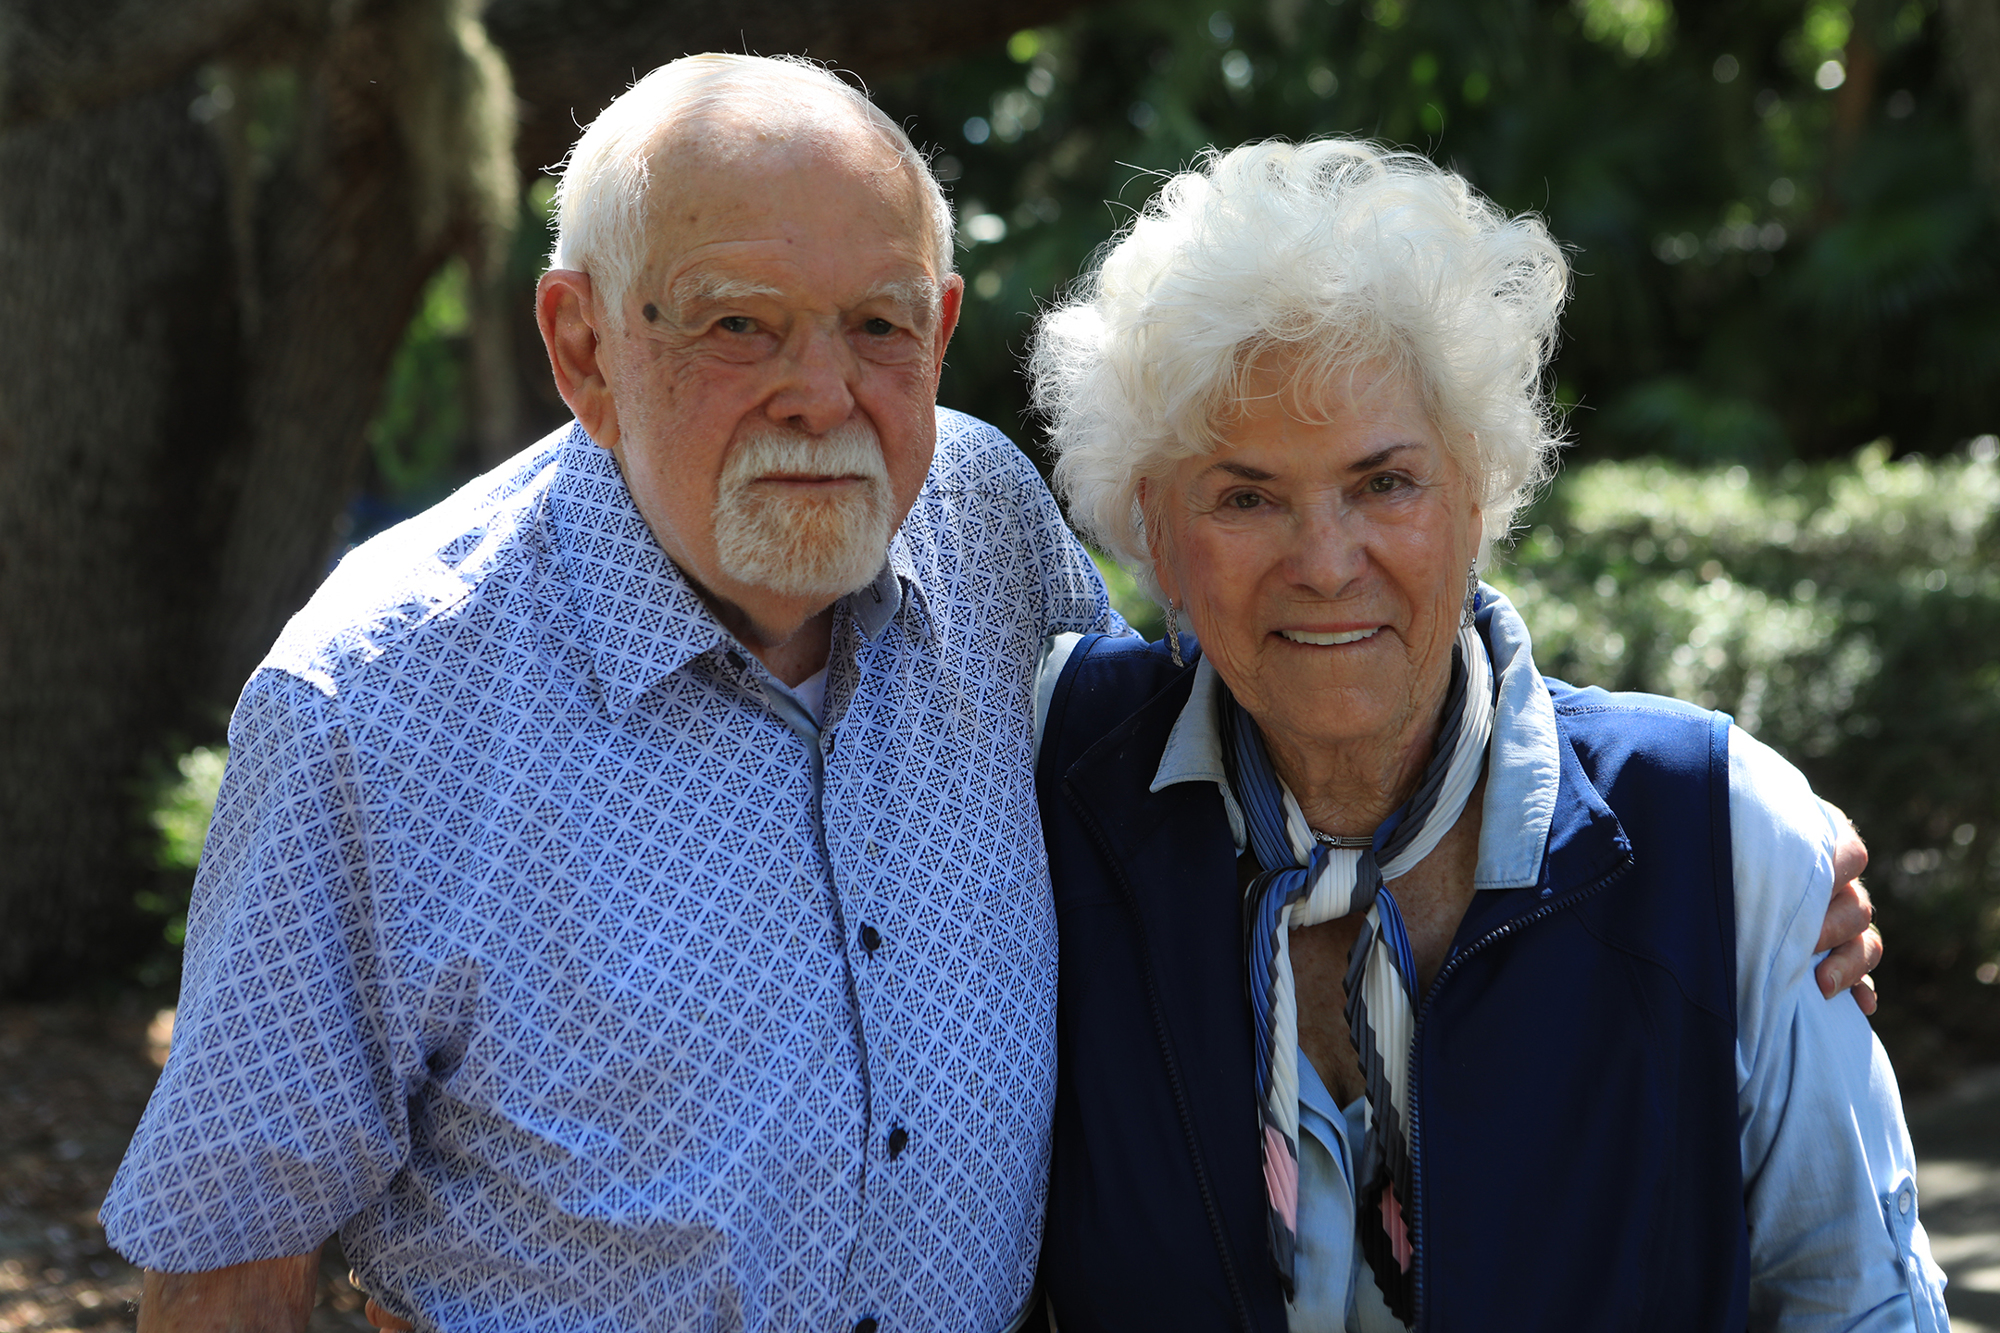 Joe Jennings and Denise Barker have embraced life and kept busy over the past 11 years. (Photo by Harry Sayer)